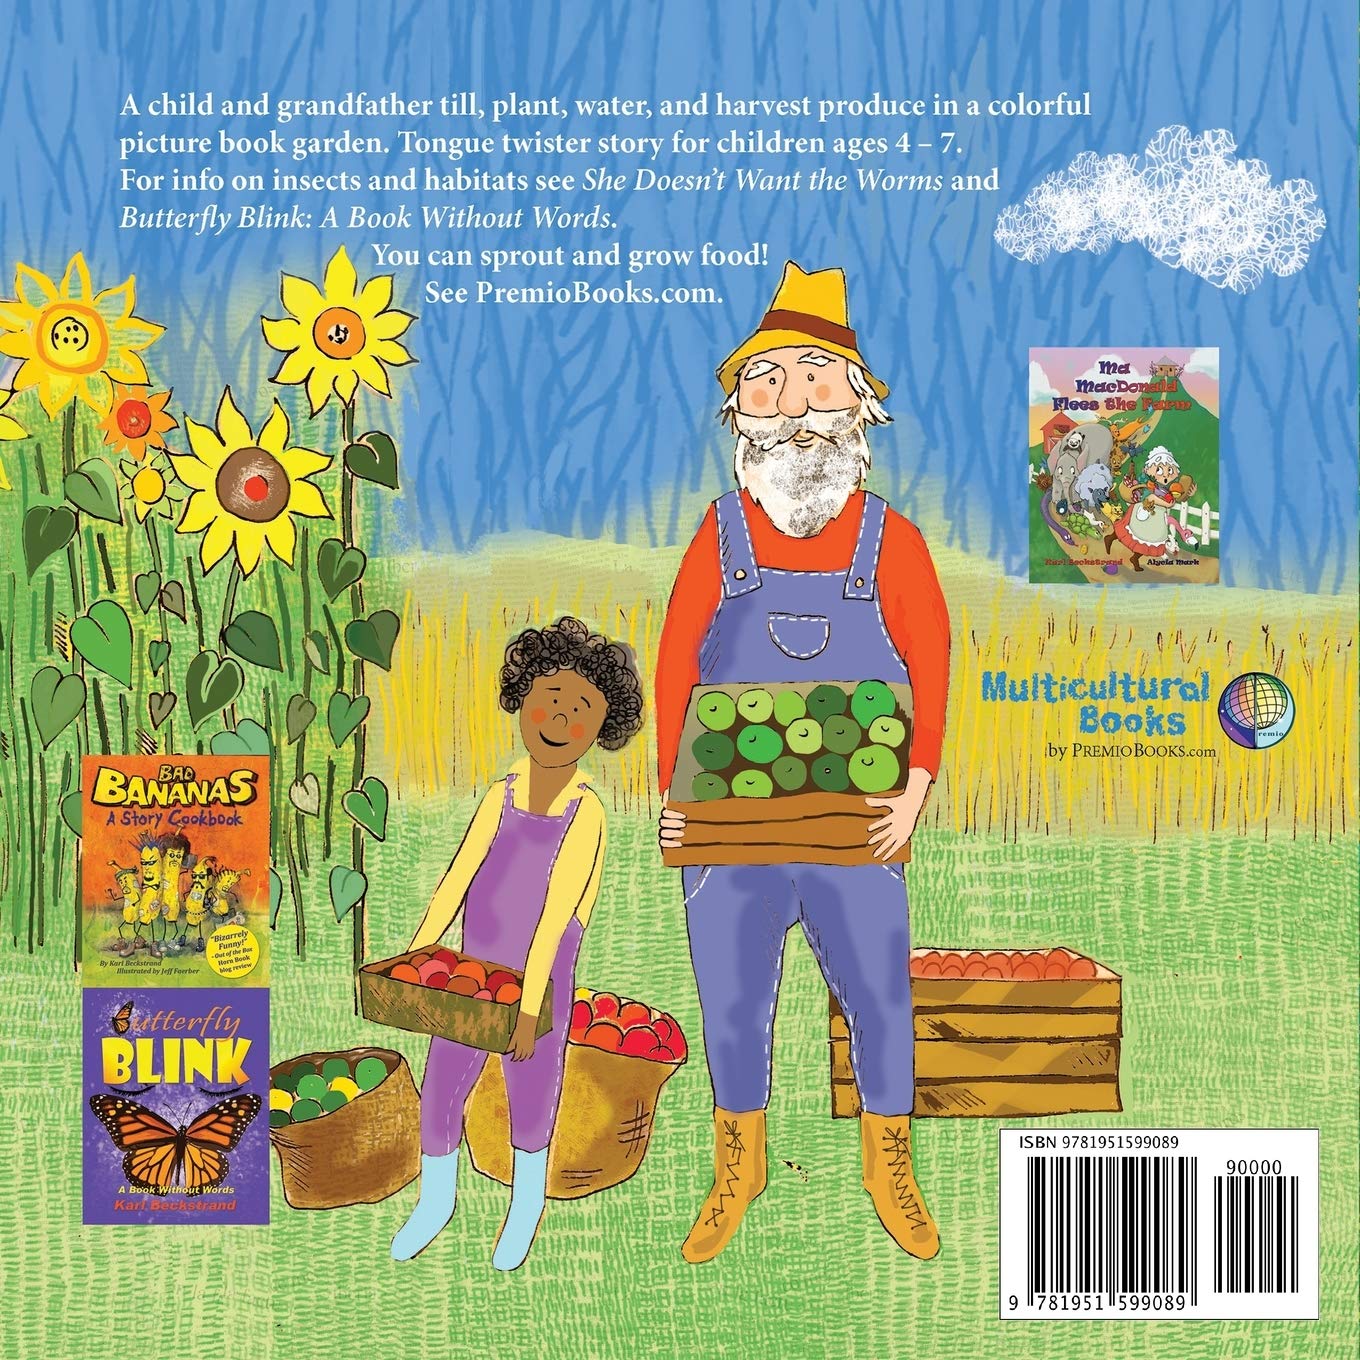 GROW: How We Get Food from Our Garden (Food Books for Kids)